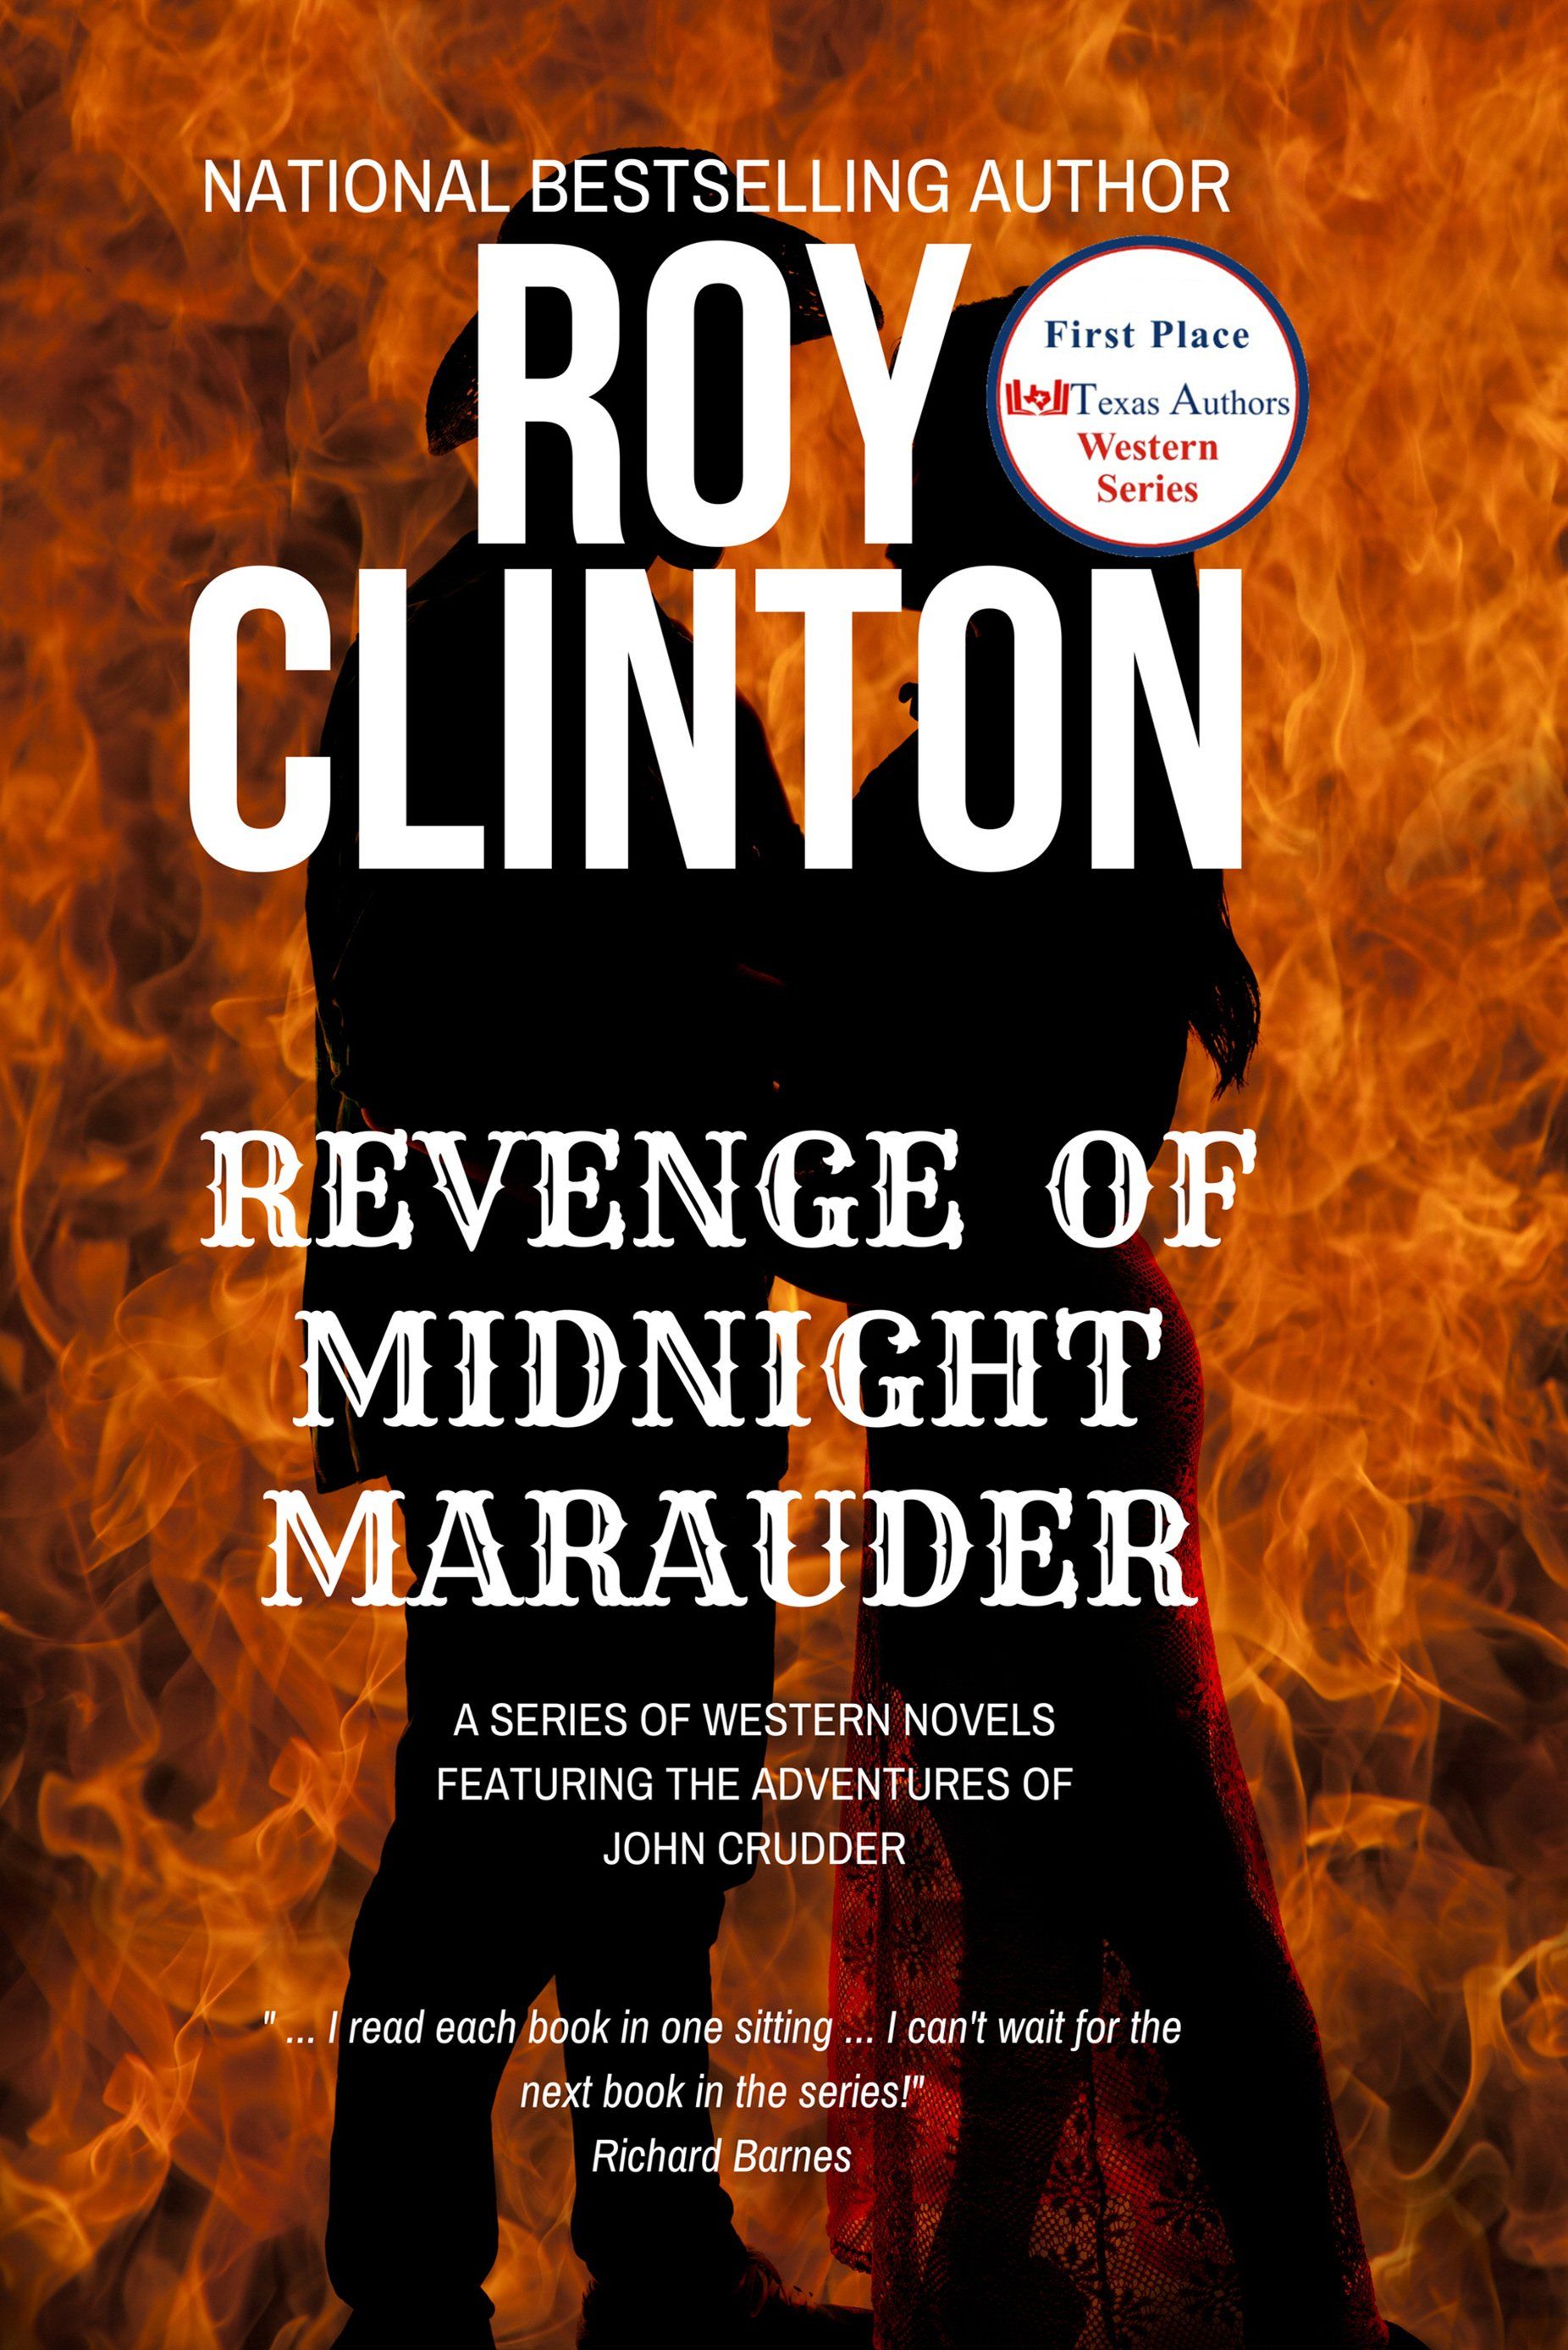 Paperback and Kindle eBook called Revenge of Midnight Marauder by Roy Clinton